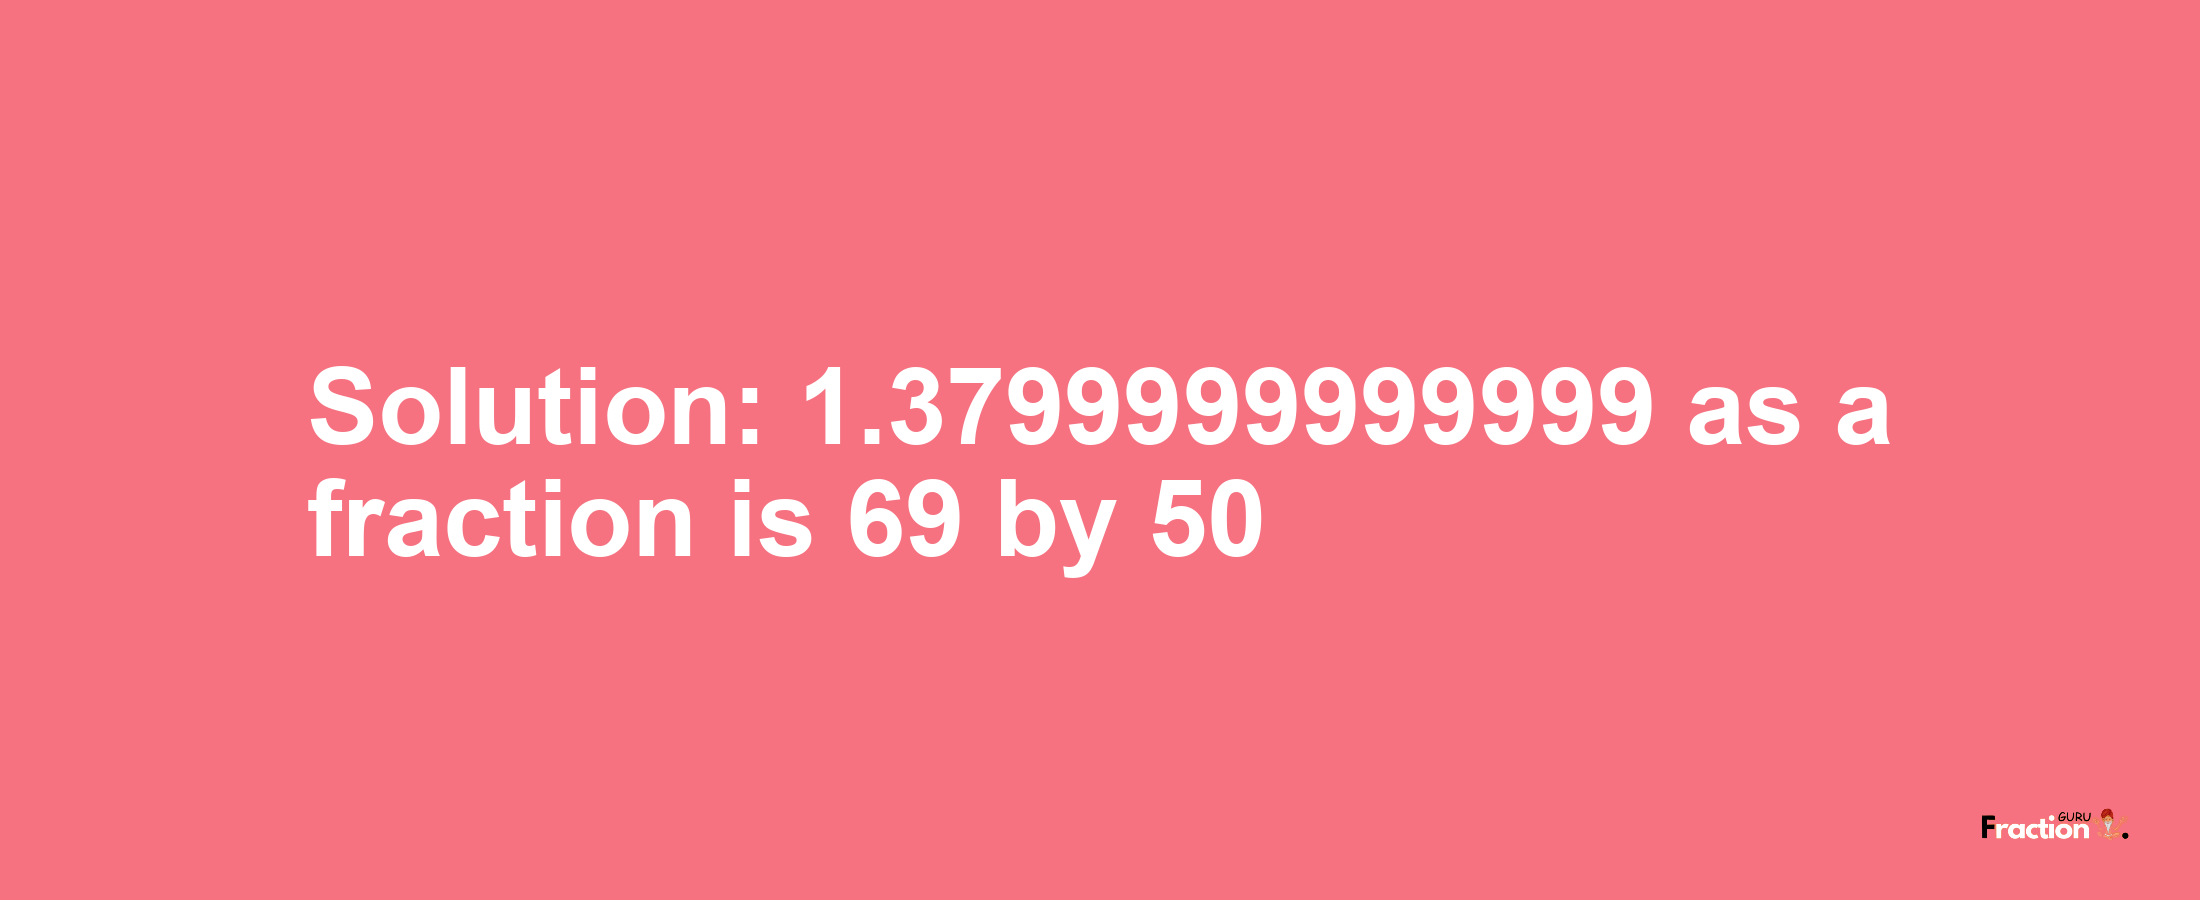 Solution:1.3799999999999 as a fraction is 69/50